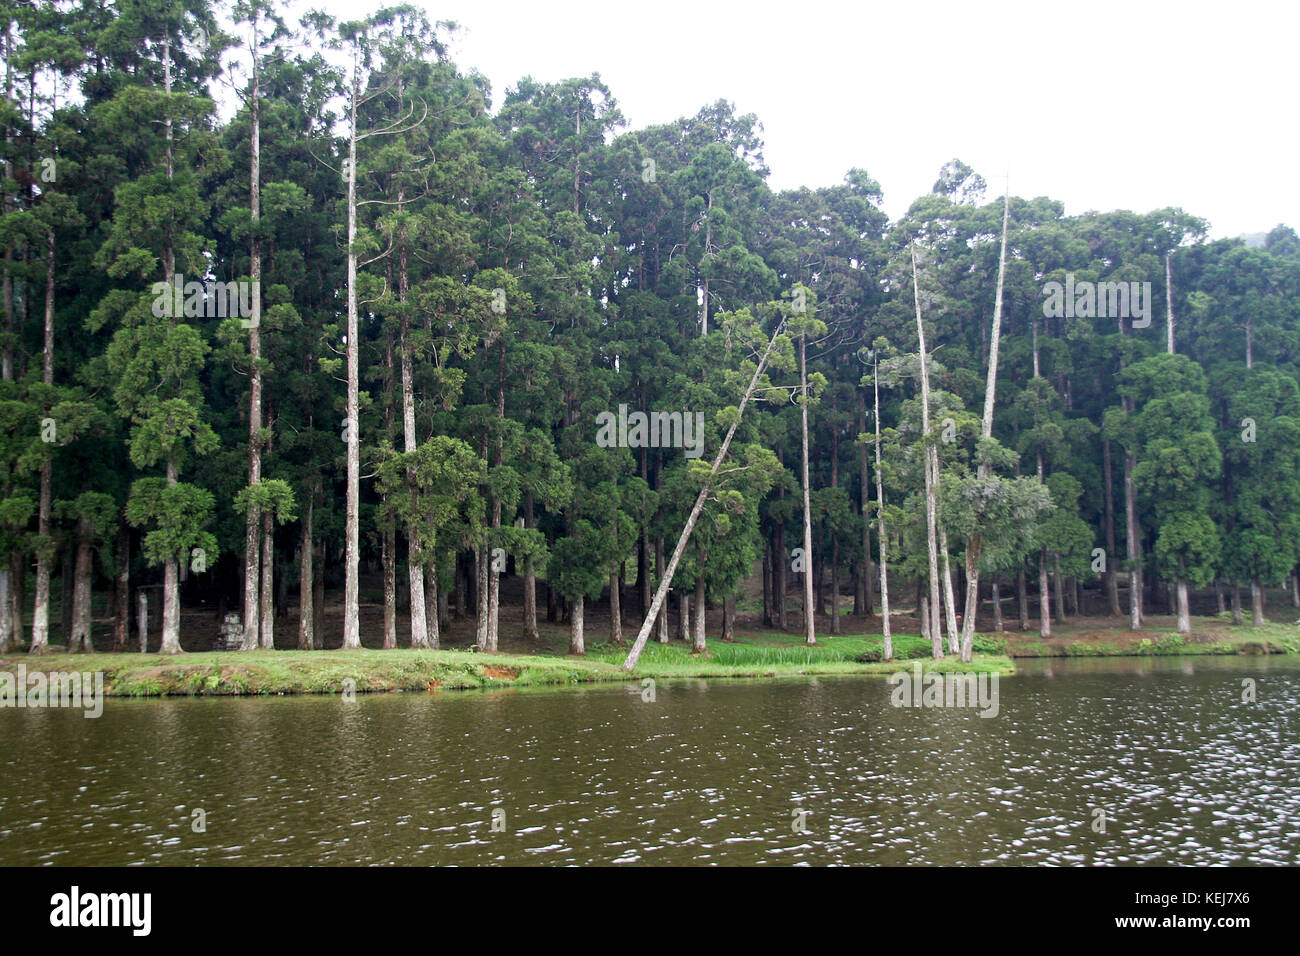 Slim trees with green foliage standing tall on bank of river Stock Photo